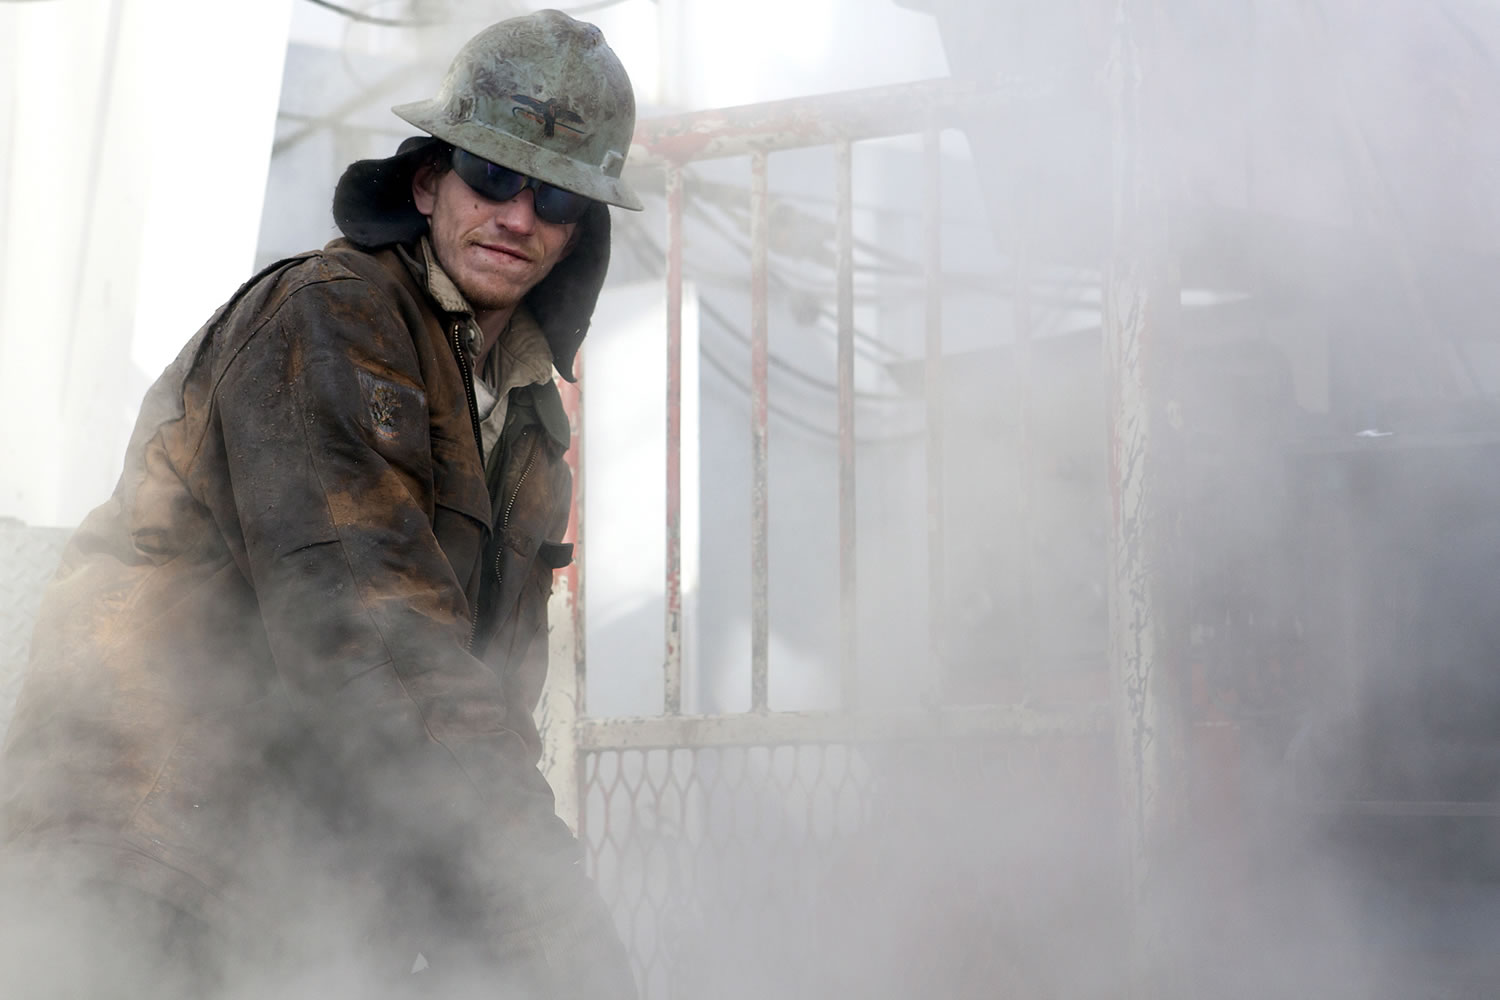 Ray Gerish, an employee of Raven Drilling, de-ices the floor of a drilling rig with steam in Watford City, N.D., on Thursday.